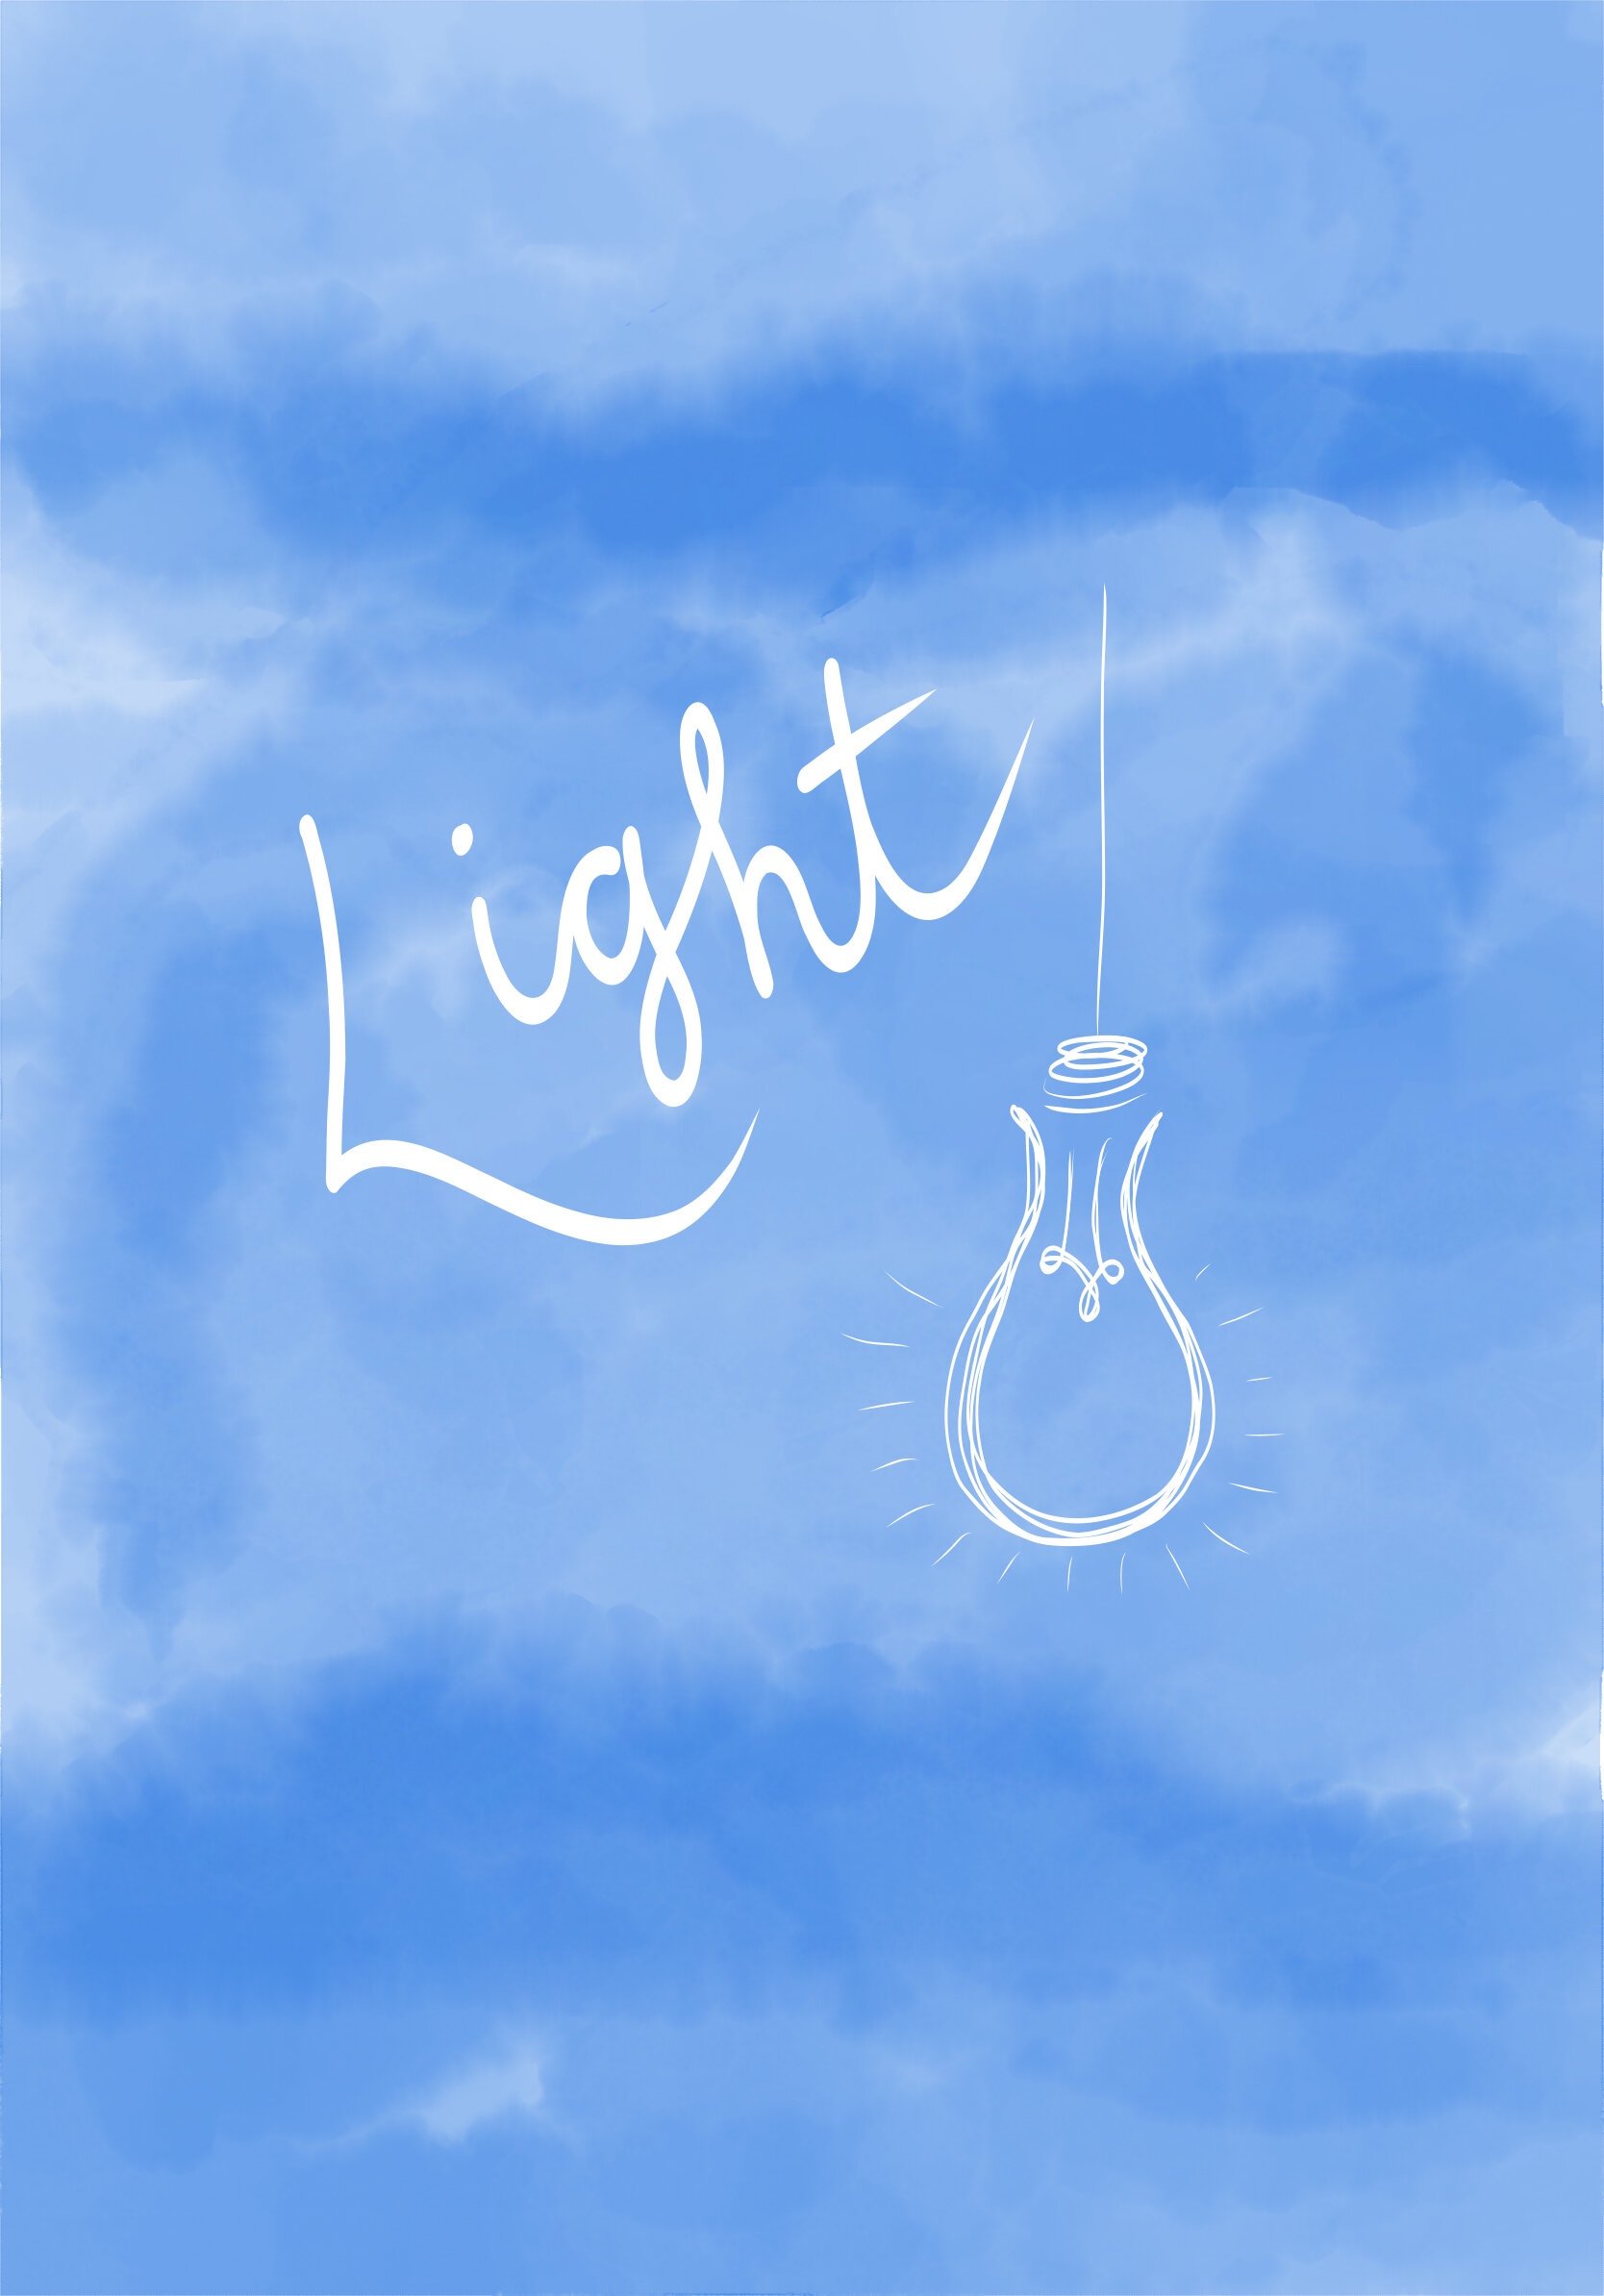 Light by Nour